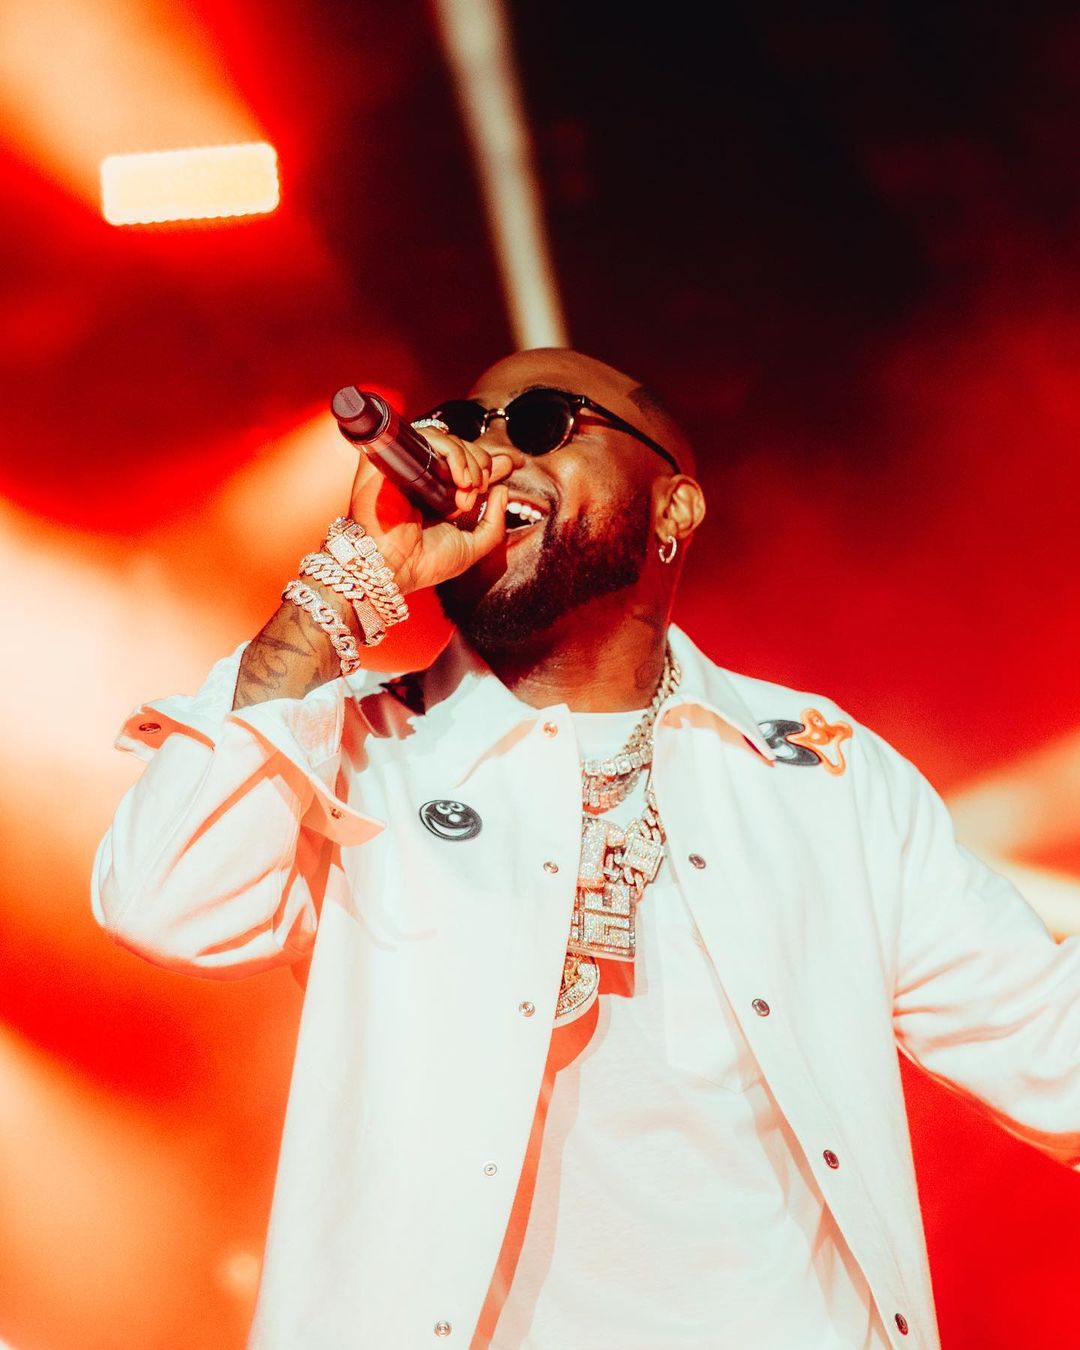 Davido Raises 200M In 2 Days, Adds 50M & Donates To Orphanages Across Nigeria